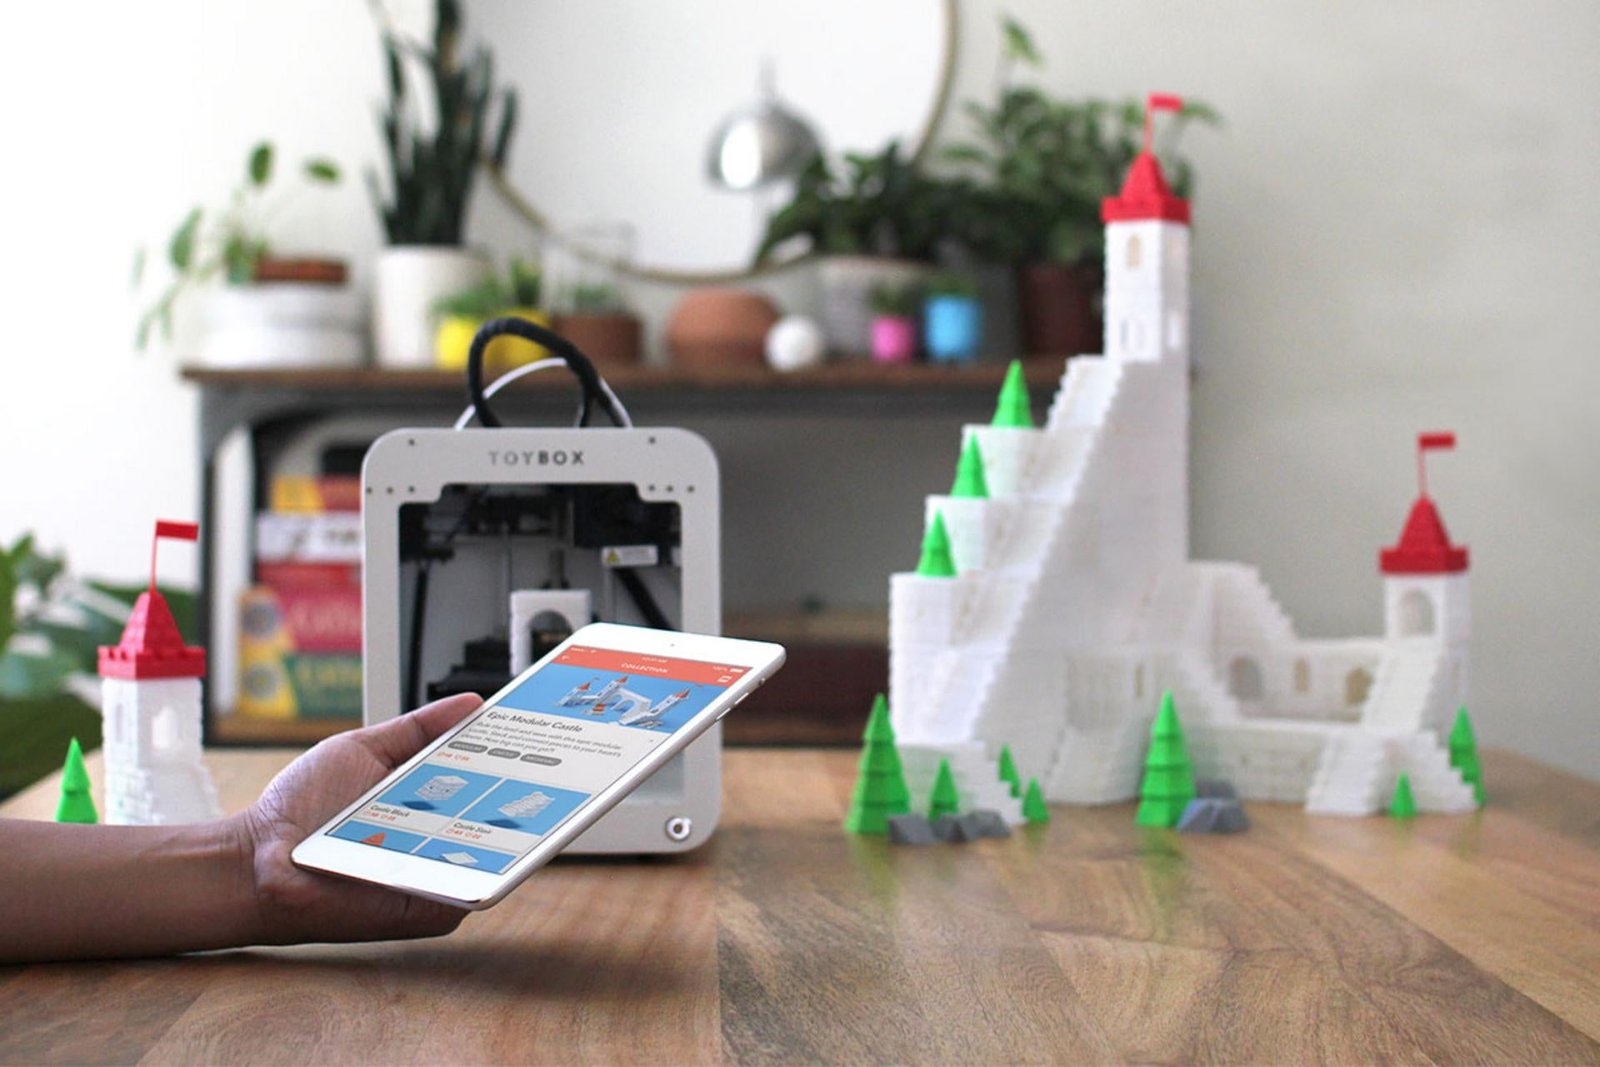 Make your own toys with this easy-to-use 3D printer package